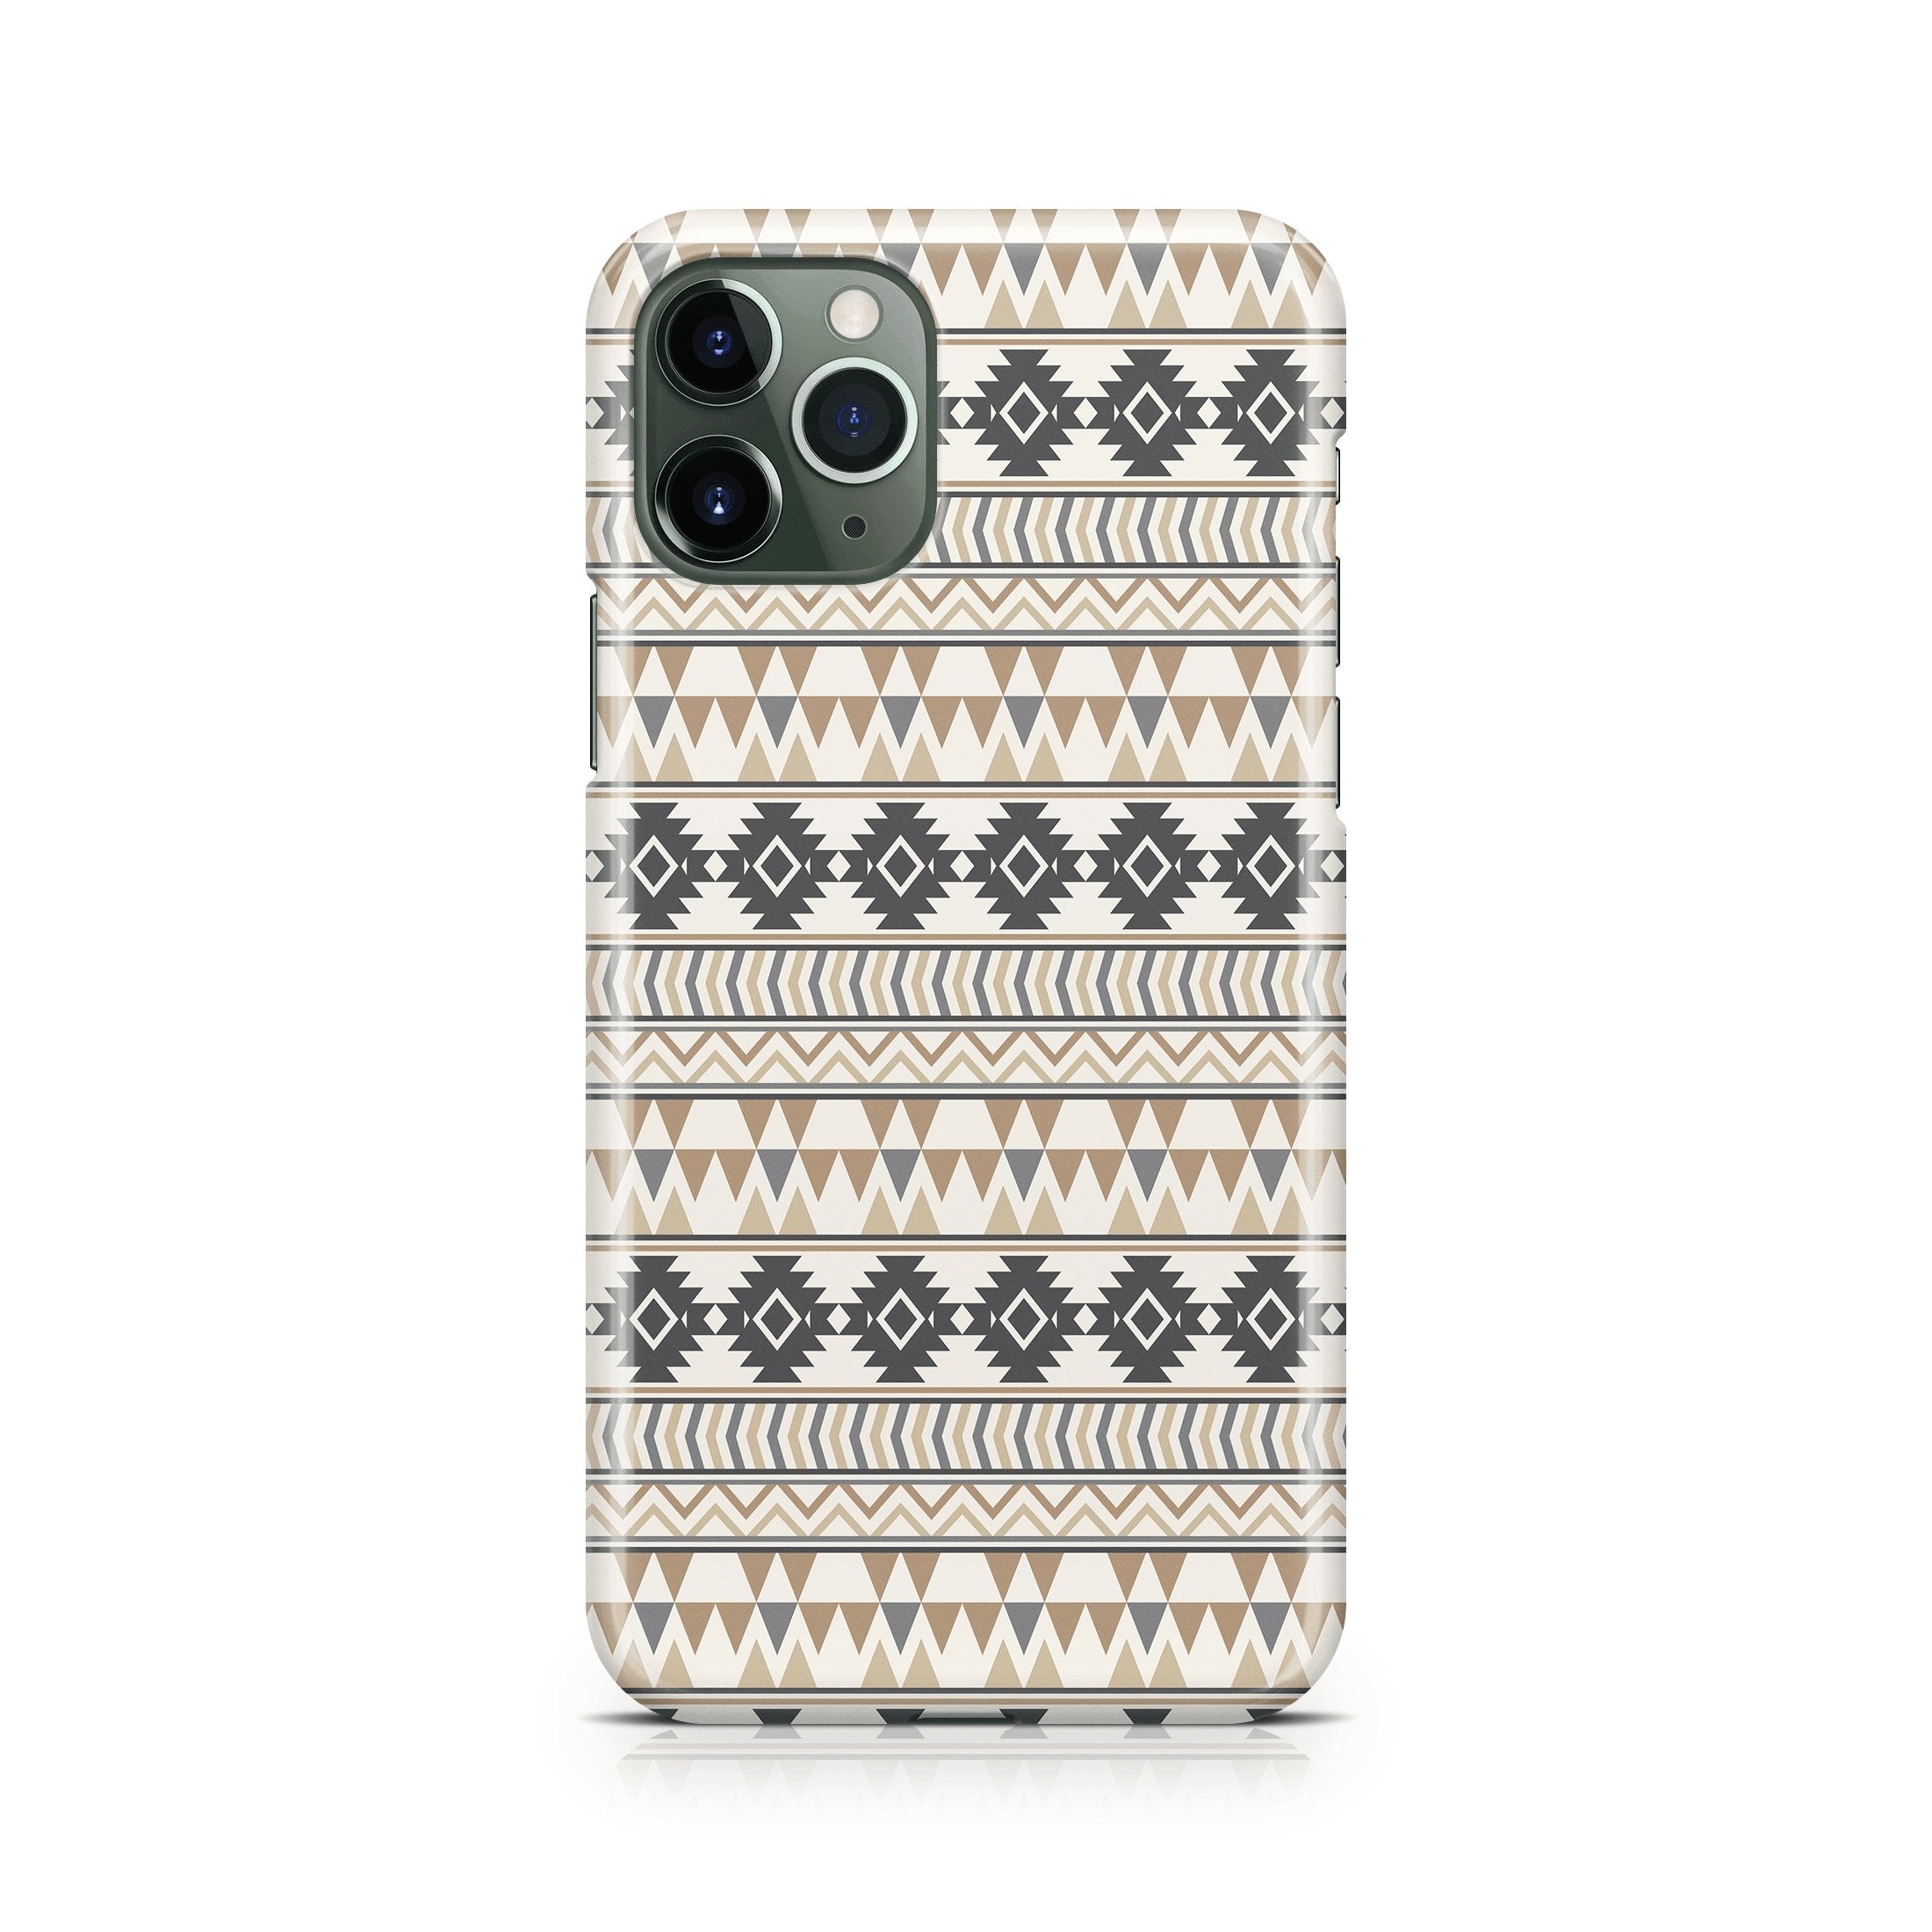 Neutral Aztec - iPhone phone case designs by CaseSwagger